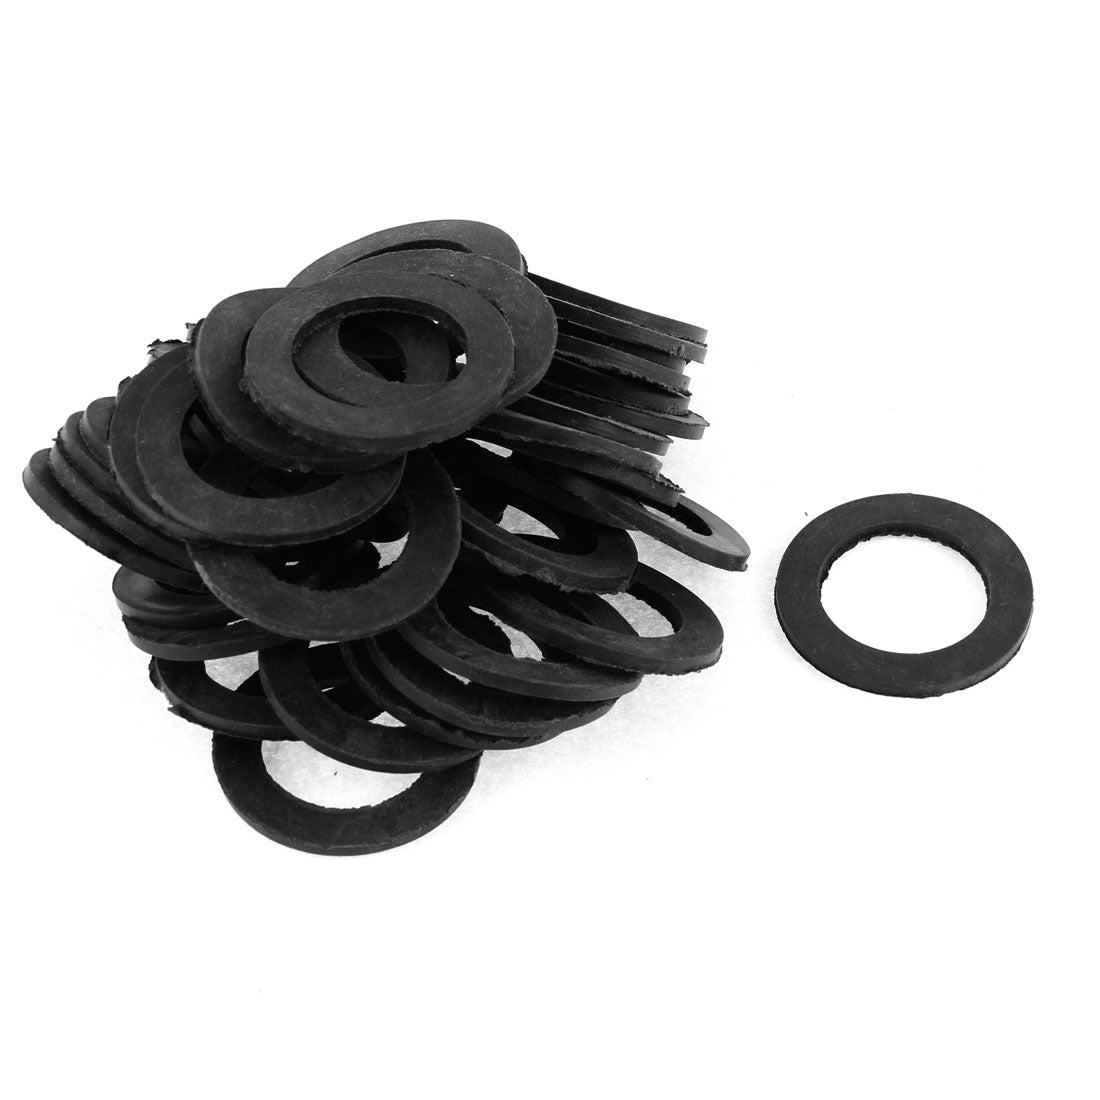 uxcell Uxcell Rubber Gasket Sealing Mat Seal O Ring Black 39mm x 25mm x 2.5mm 41Pcs